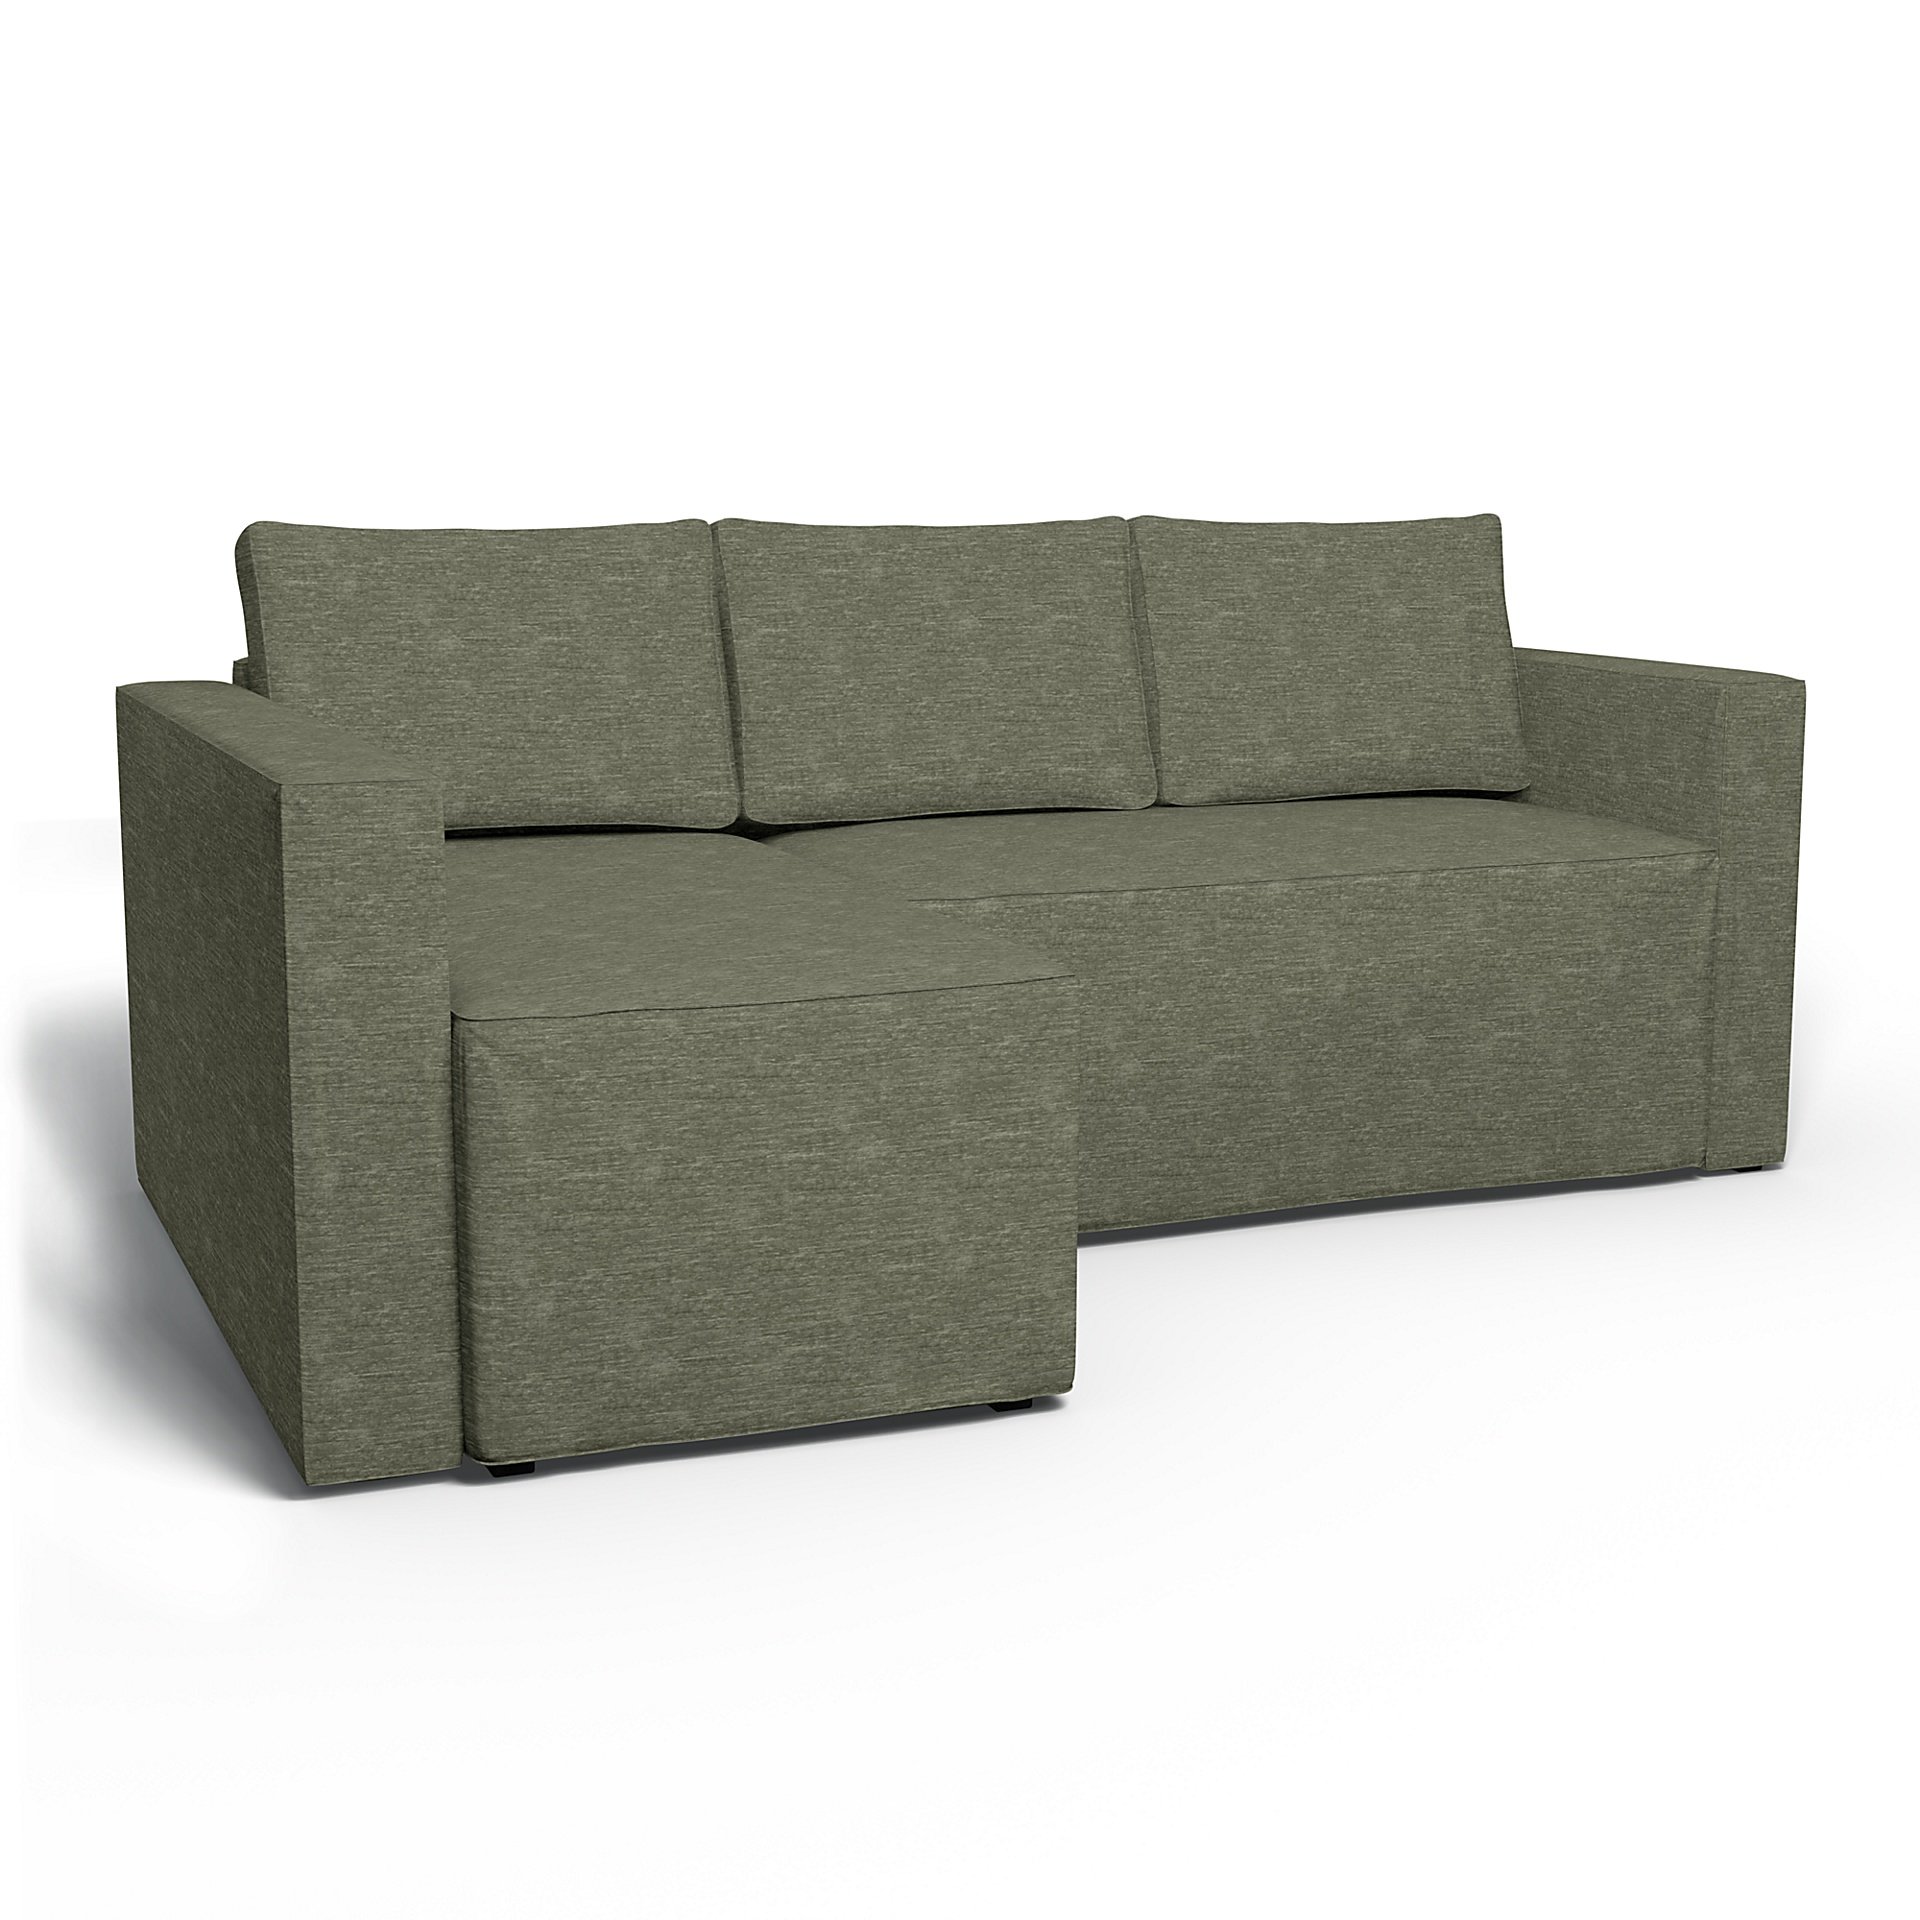 IKEA - Manstad Sofa Bed with Left Chaise Cover, Green Grey, Velvet - Bemz